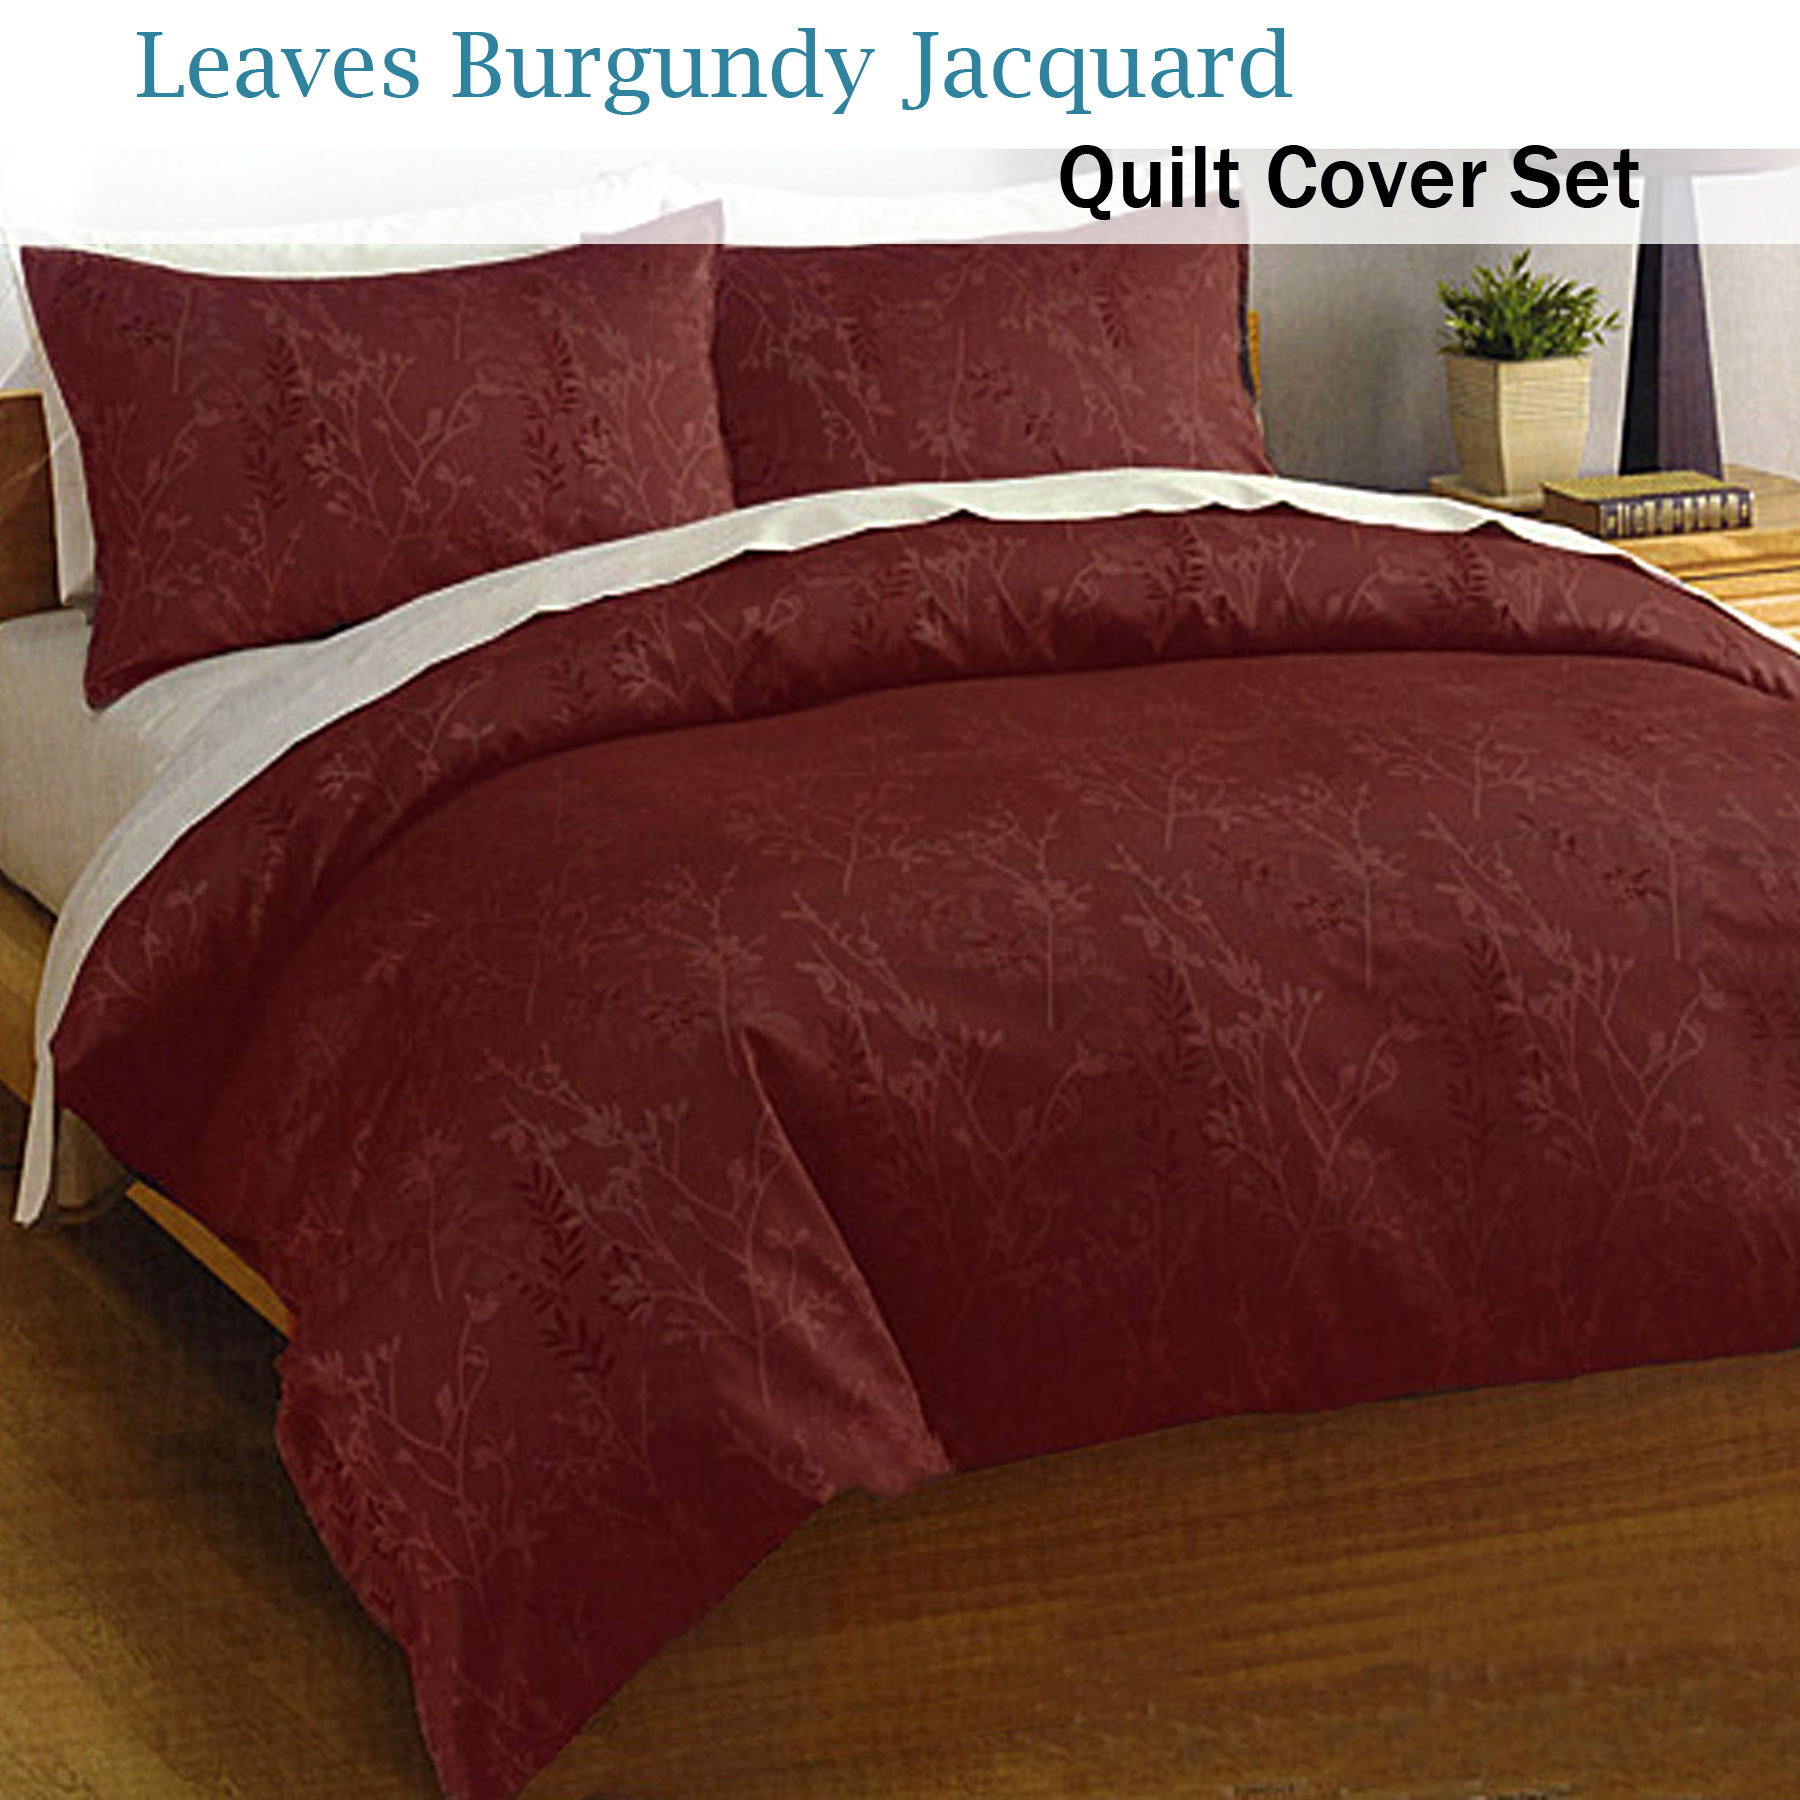 3 Pce Leaves Jacquard Burgundy Quilt Cover Set By Deco Queen